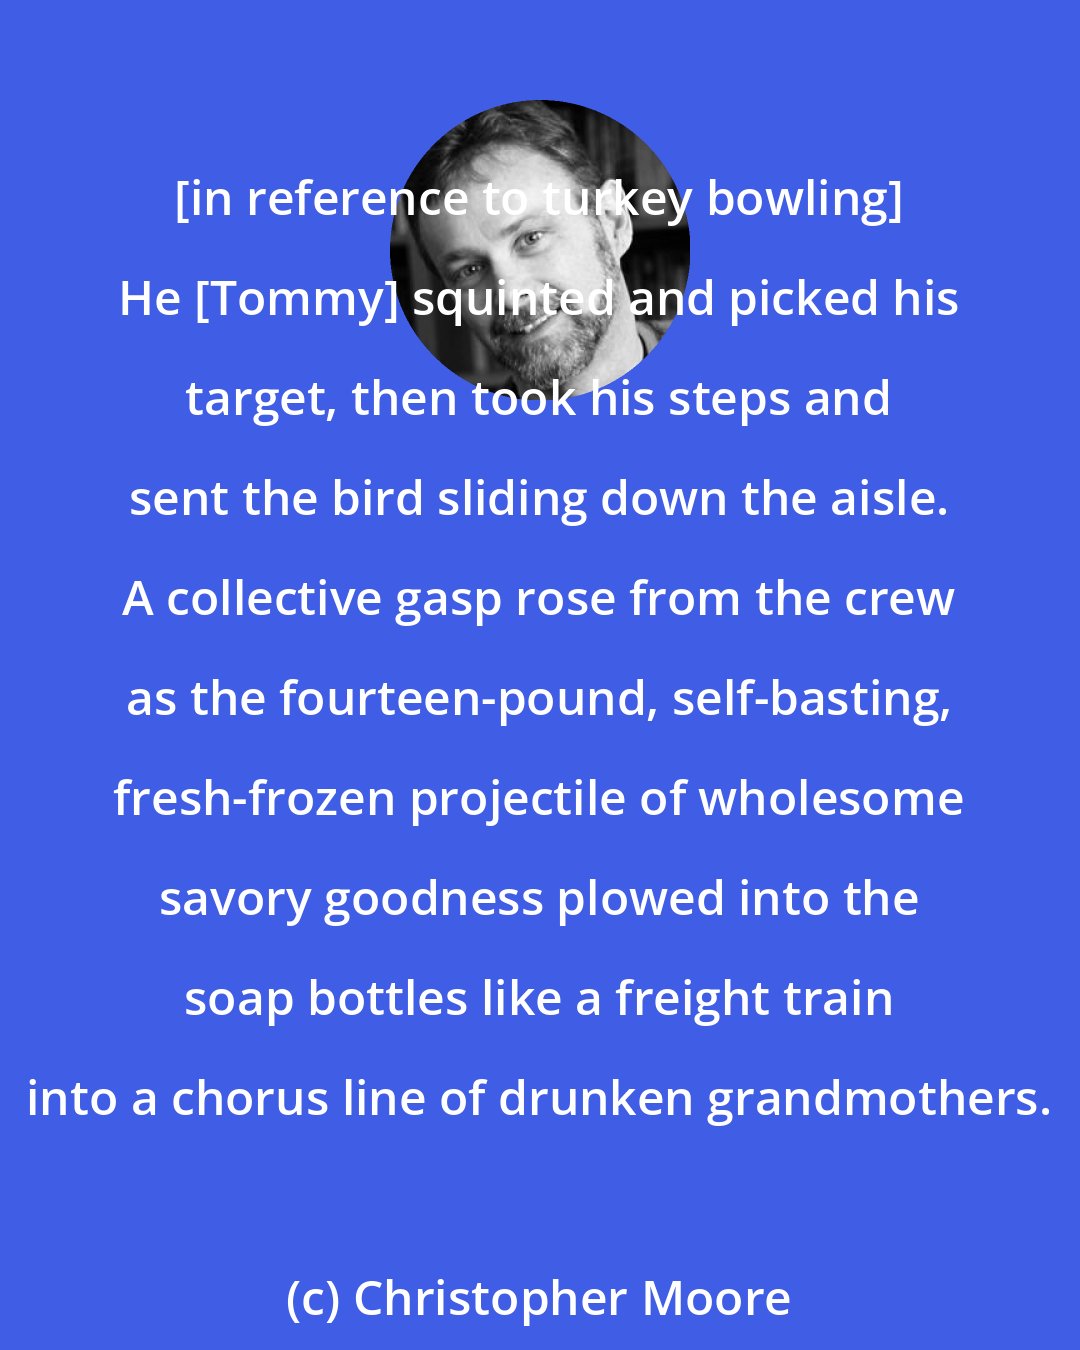 Christopher Moore: [in reference to turkey bowling] He [Tommy] squinted and picked his target, then took his steps and sent the bird sliding down the aisle. A collective gasp rose from the crew as the fourteen-pound, self-basting, fresh-frozen projectile of wholesome savory goodness plowed into the soap bottles like a freight train into a chorus line of drunken grandmothers.